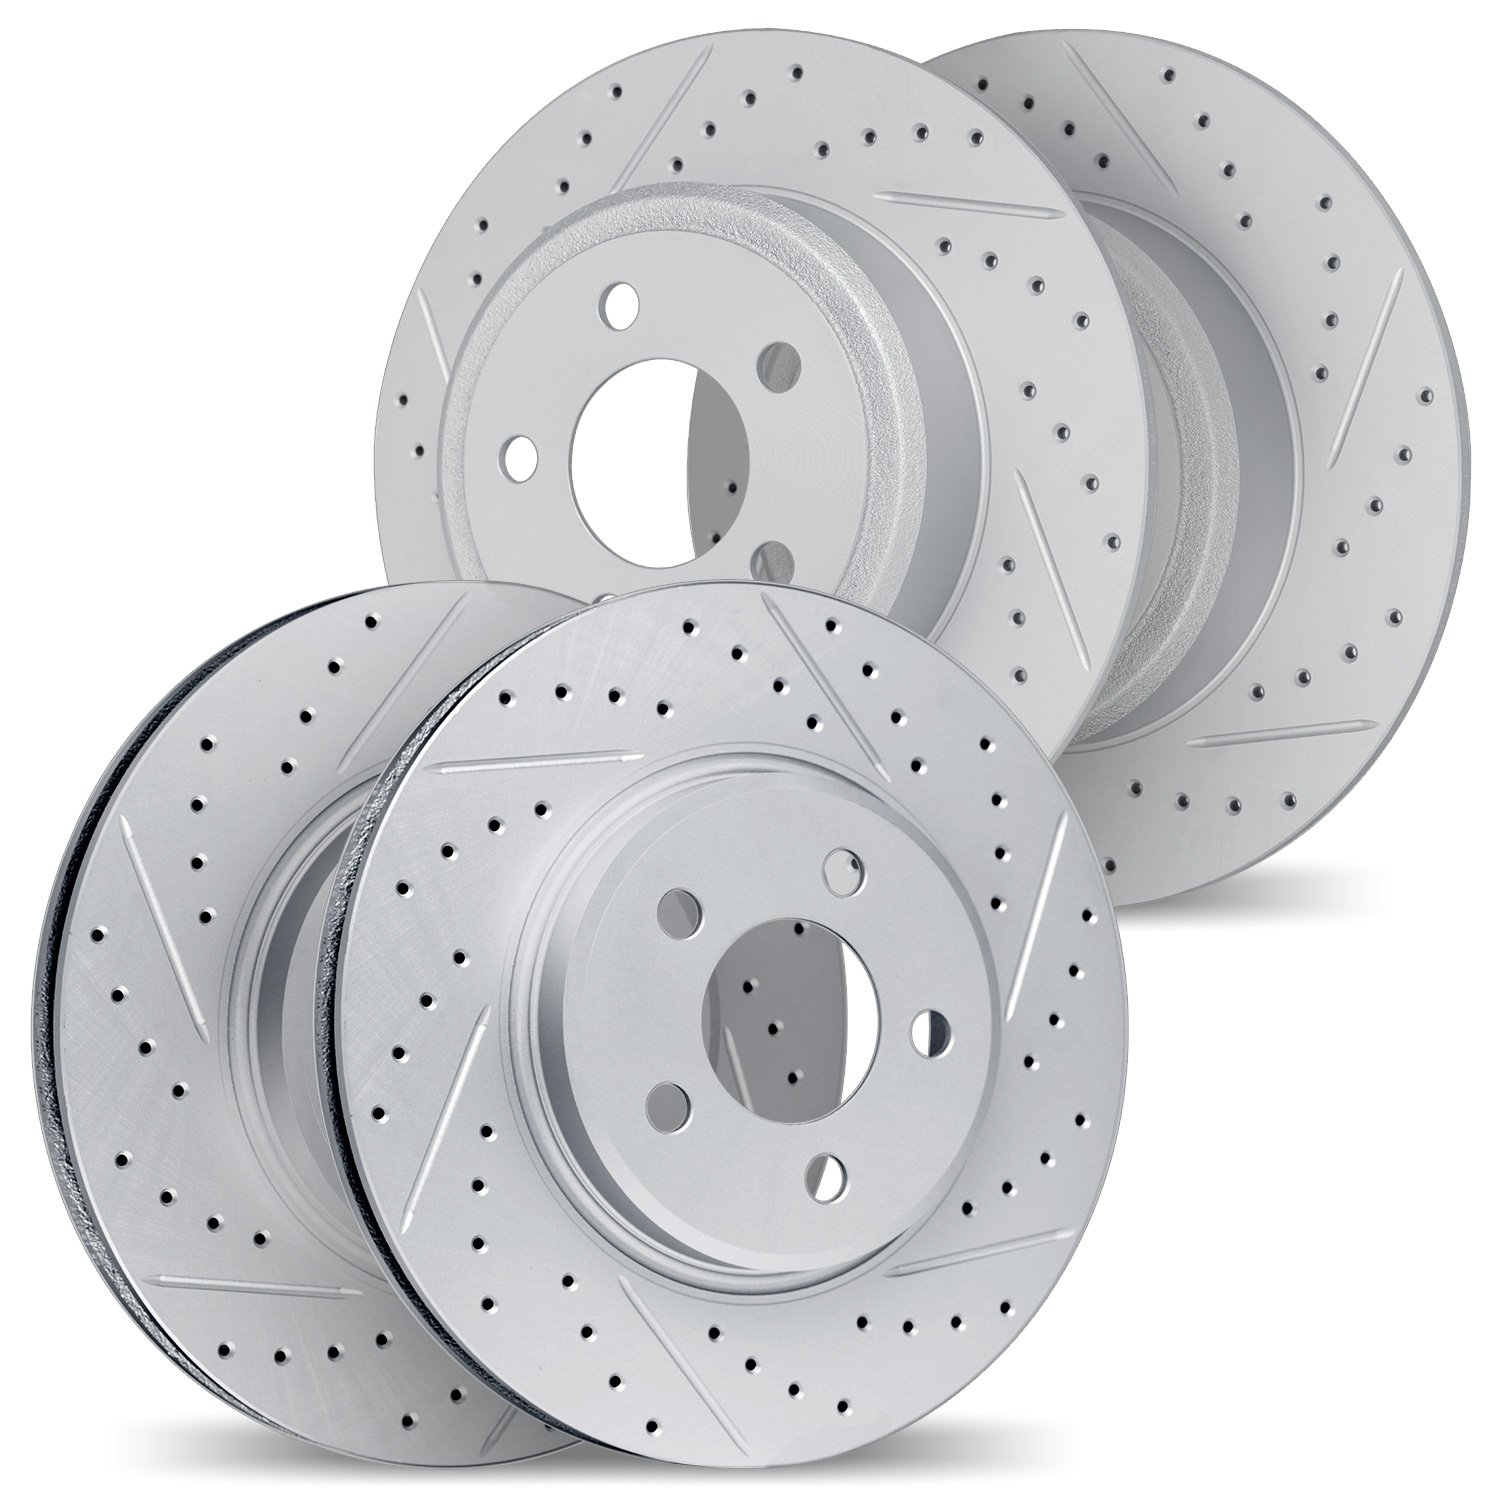 2004-03054 Geoperformance Drilled/Slotted Brake Rotors, 2013-2018 Kia/Hyundai/Genesis, Position: Front and Rear